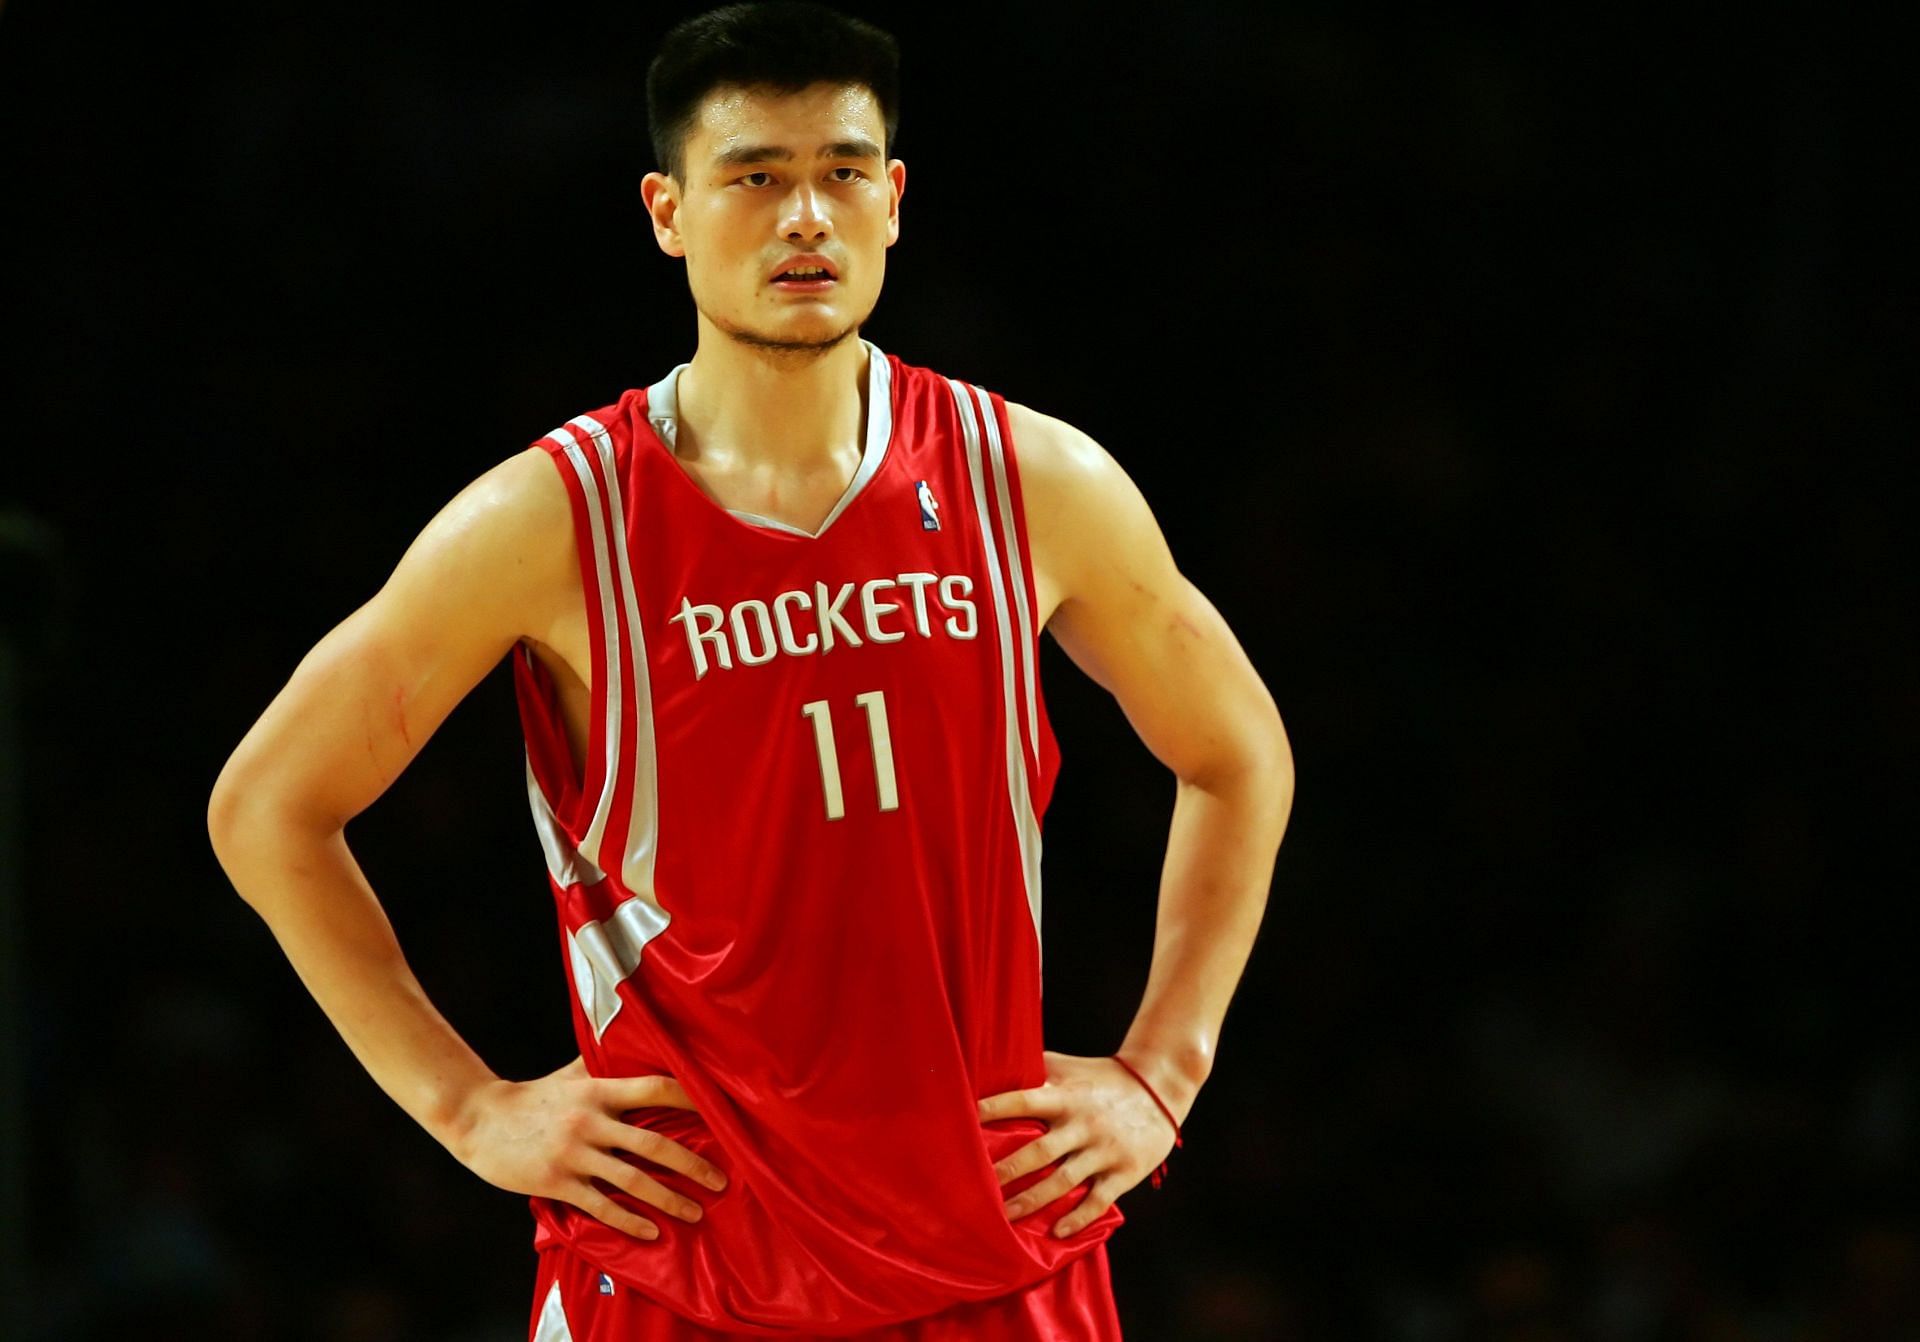 Houston Rockets center Yao Ming was an eight-time All-Star.